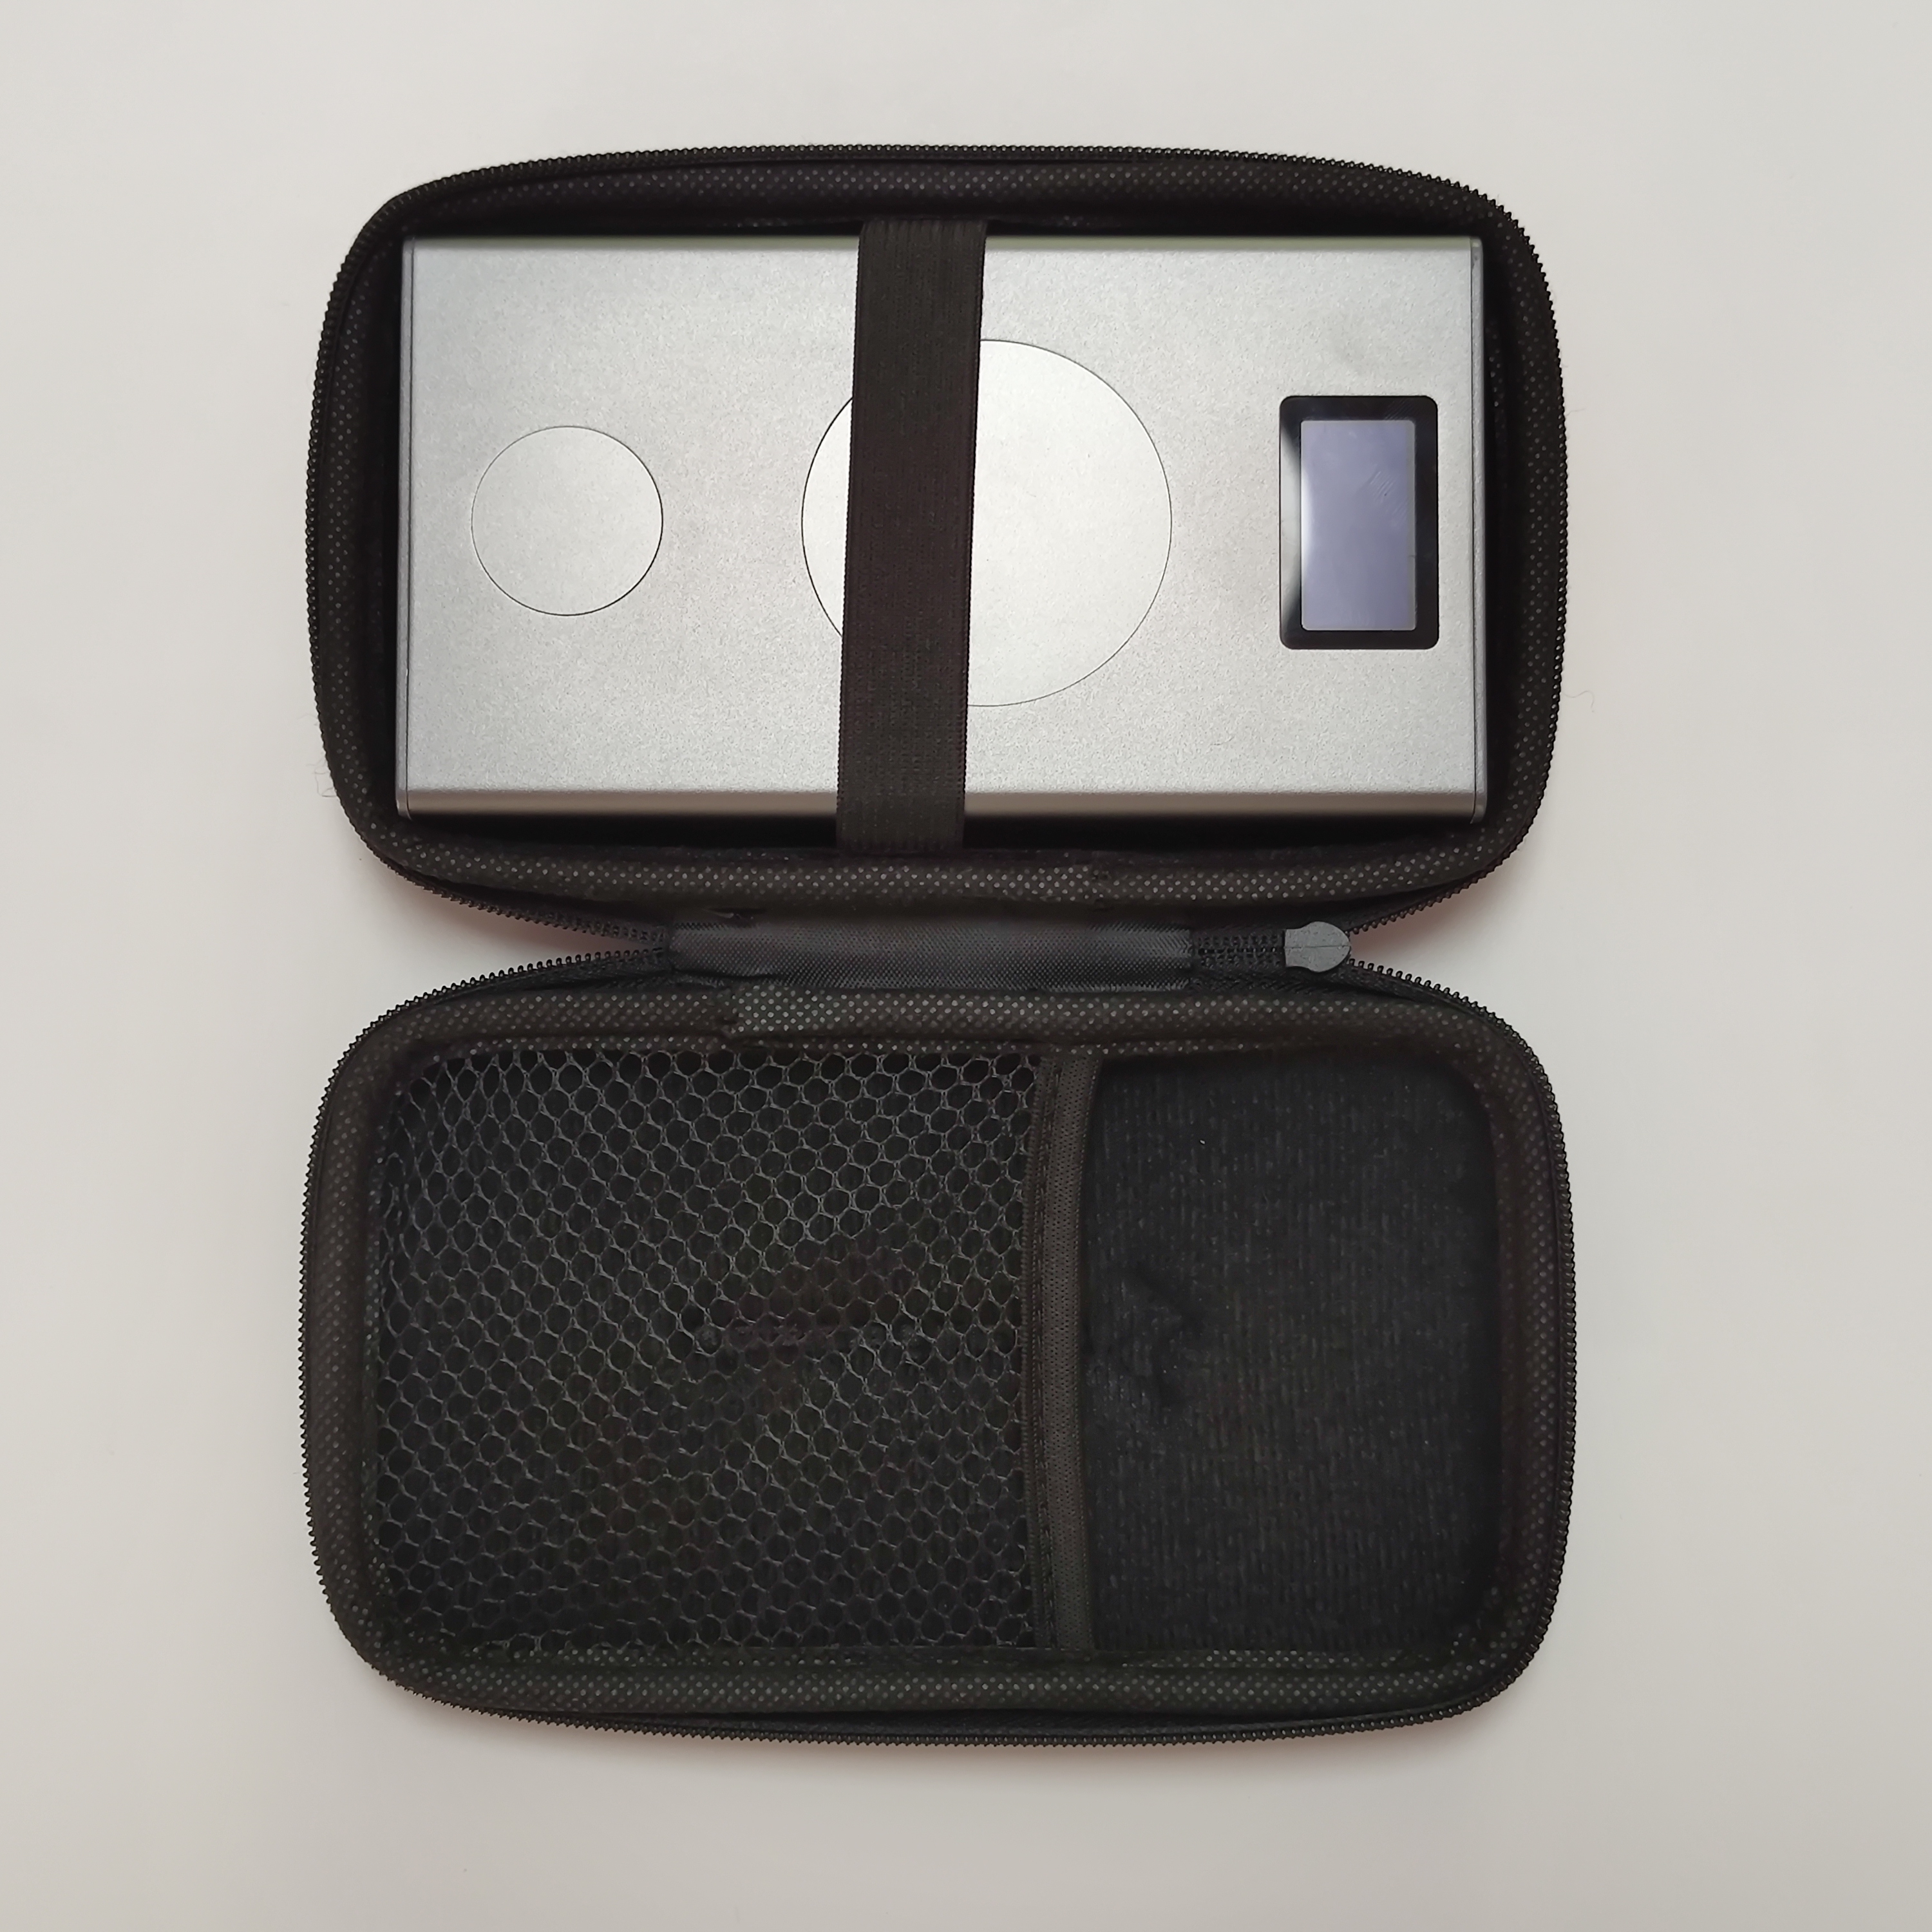 A photograph showing a top-down view of Chargeasap's Flash Pro Plus portable power bank in its hard carrying case